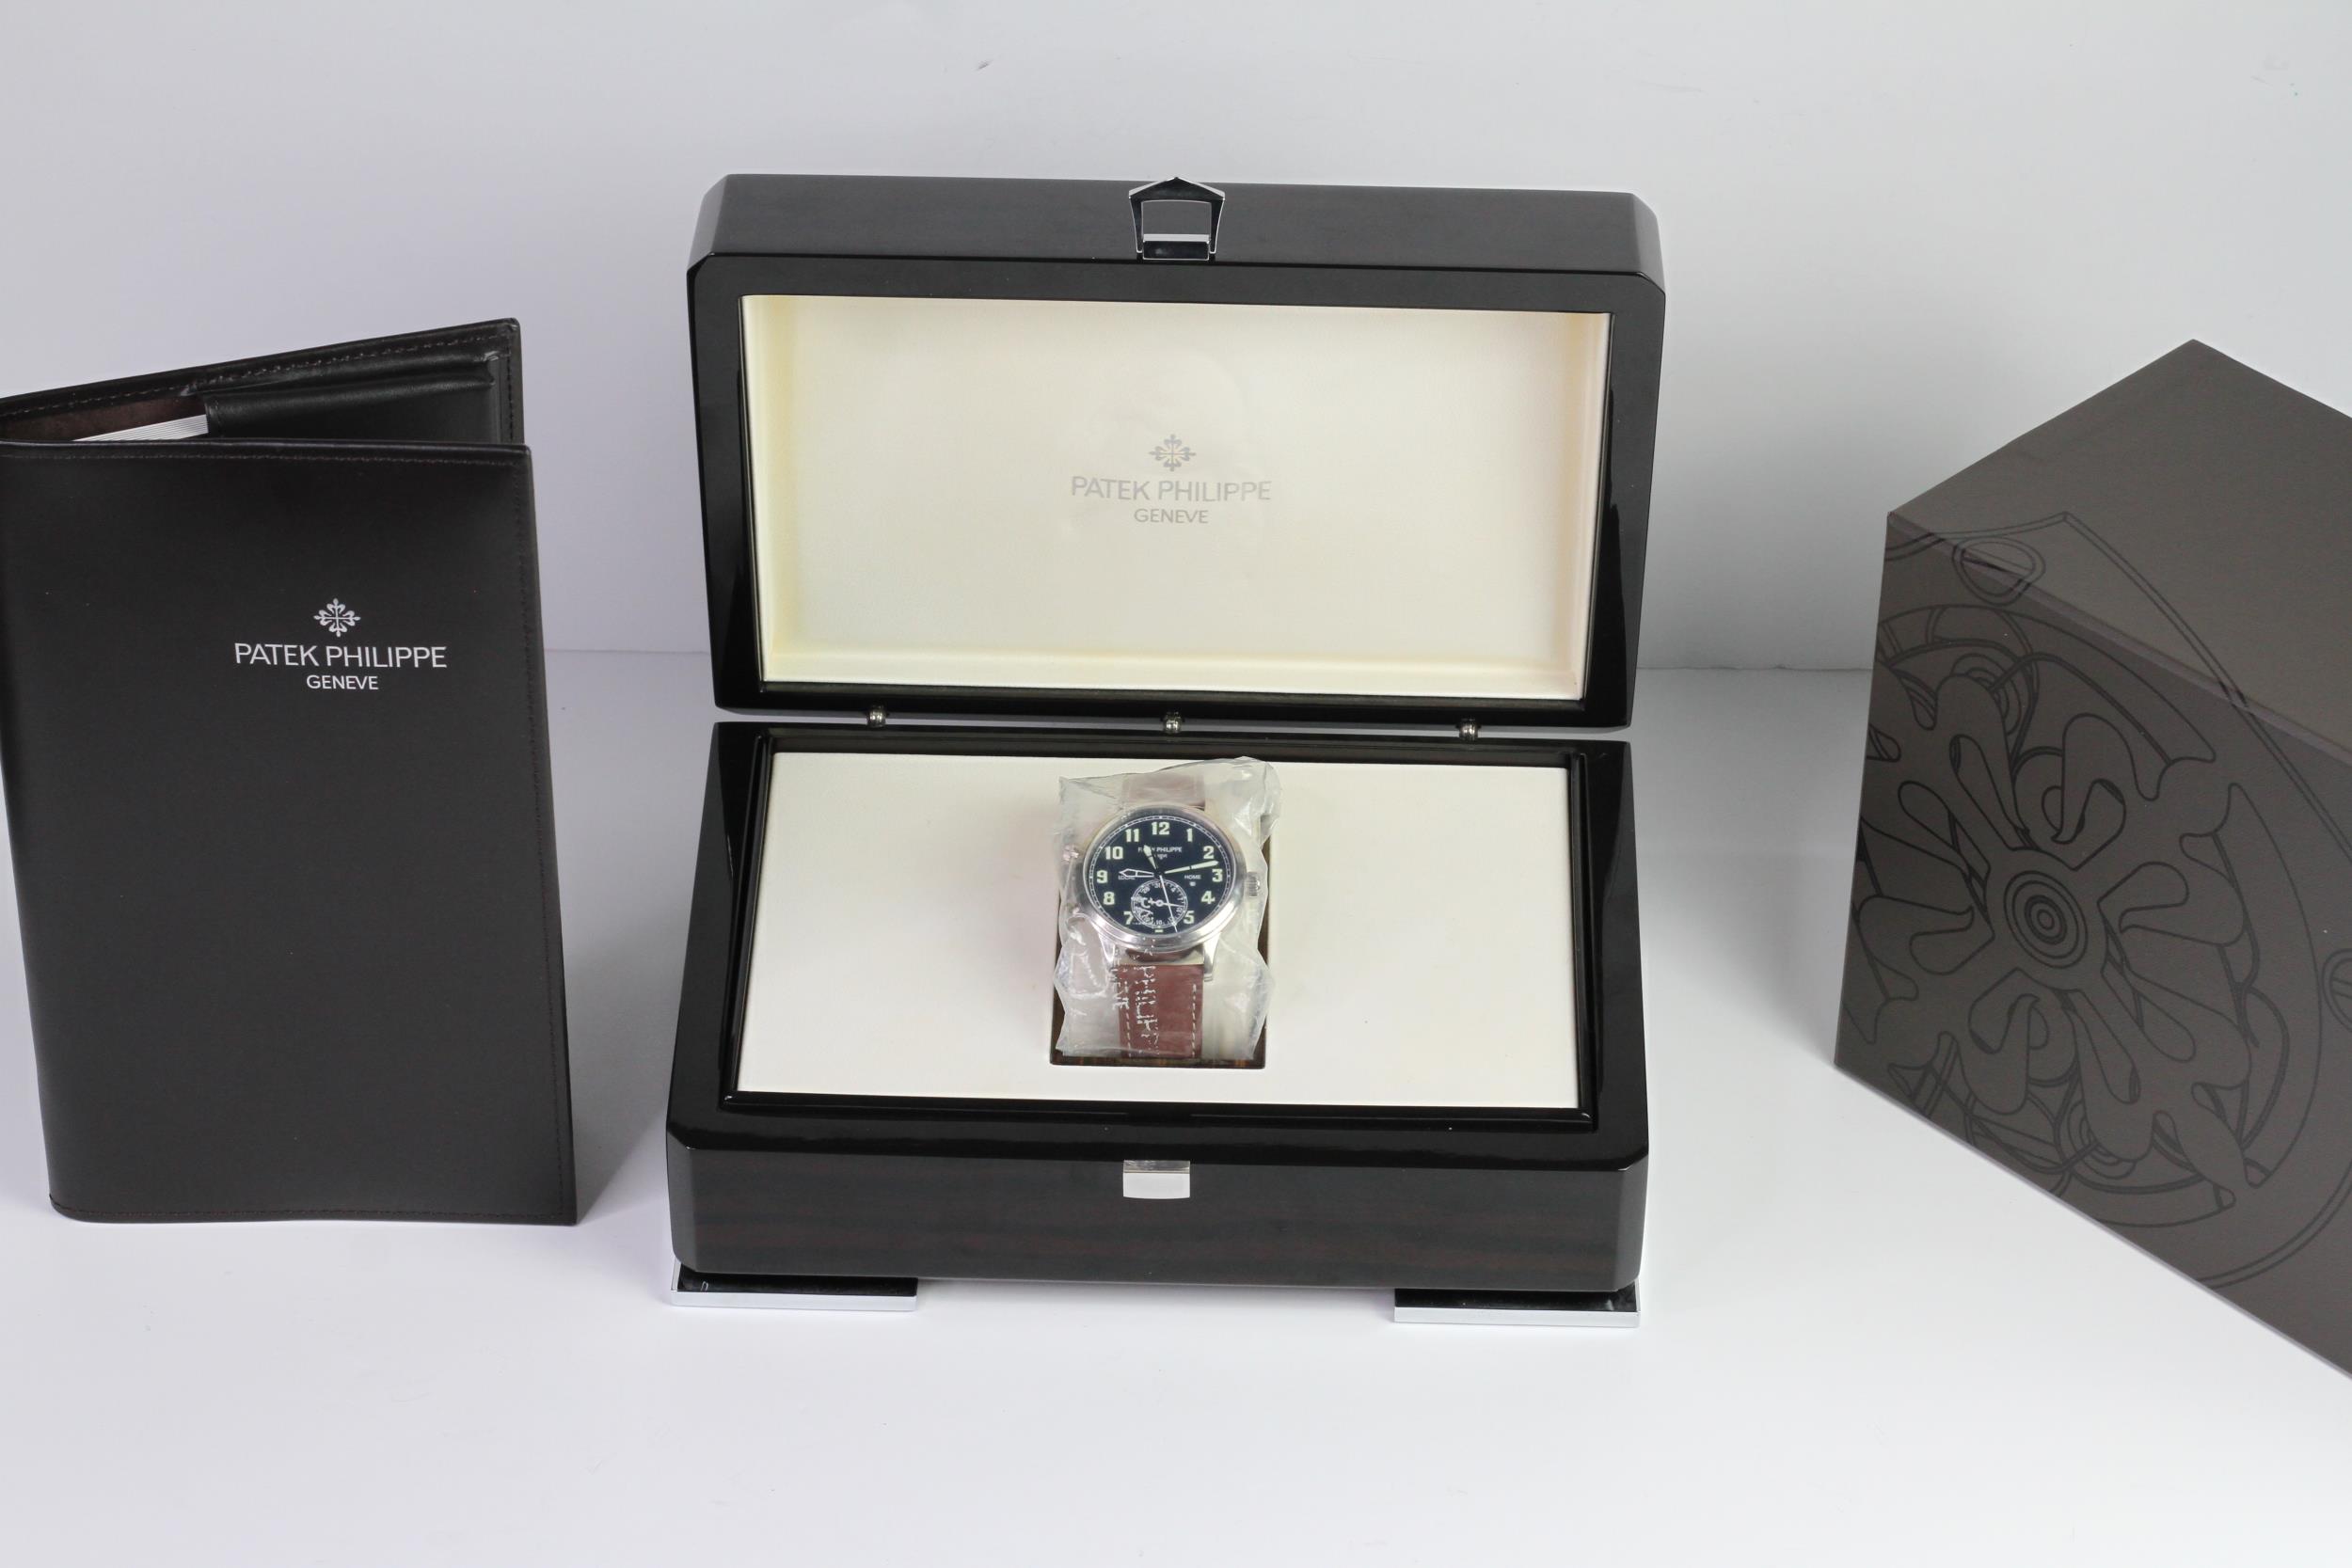 A FINE PATEK PHILIPPE CALATRAVA PILOT TRAVEL TIME REFERENCE 5224G-001, SEALED FROM SERVICE, WITH BOX